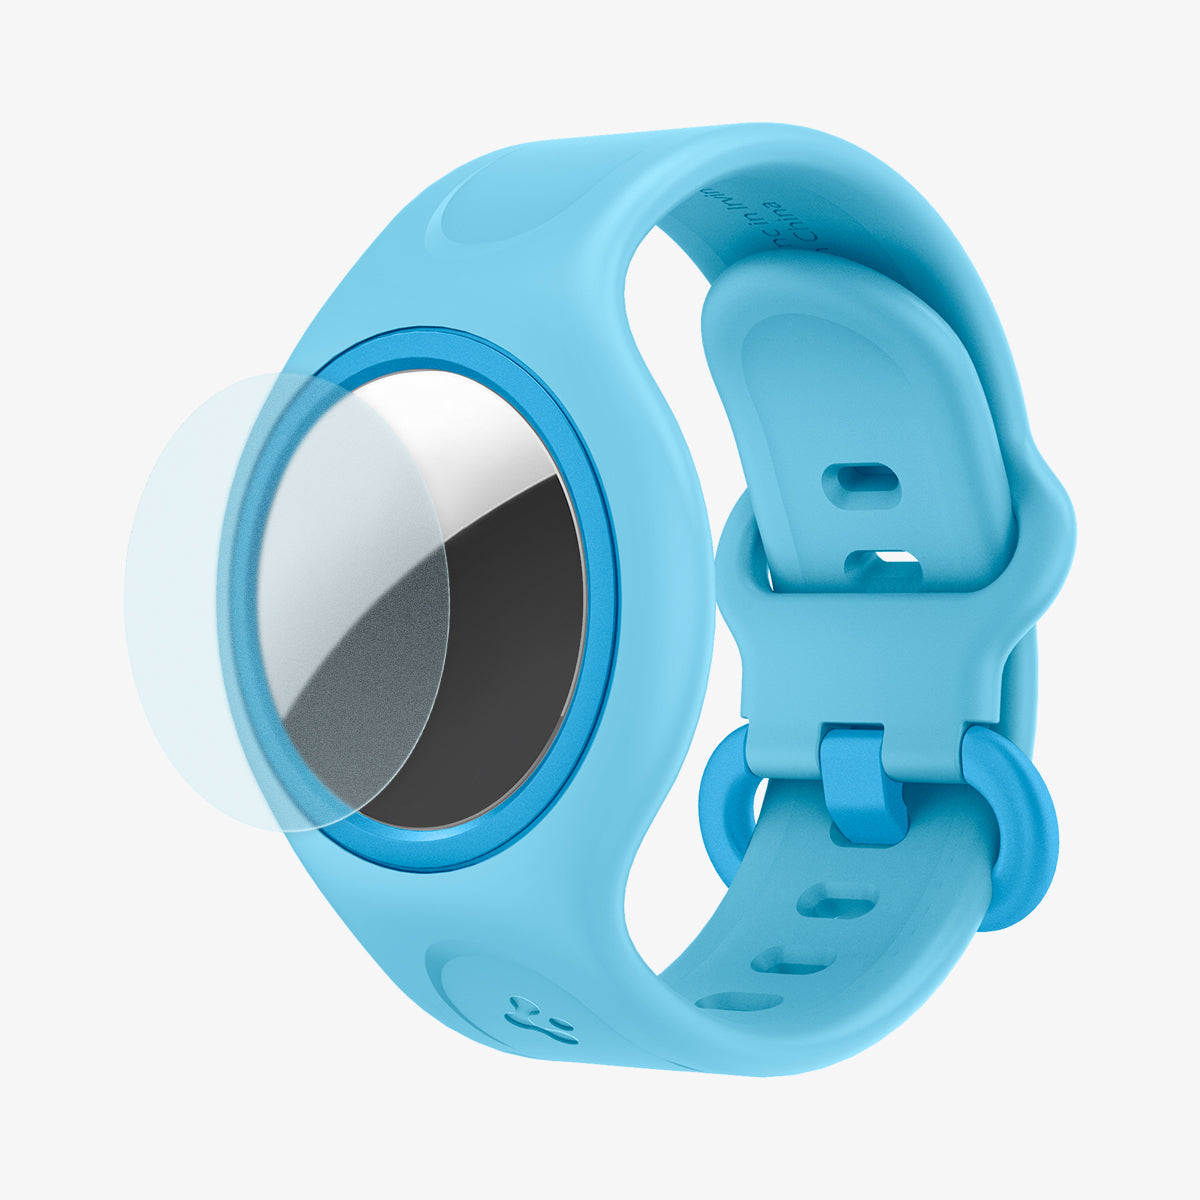 AHP03027 - AirTag Wristband Play 360 in ocean blue showing the front and side with protective film hovering in front